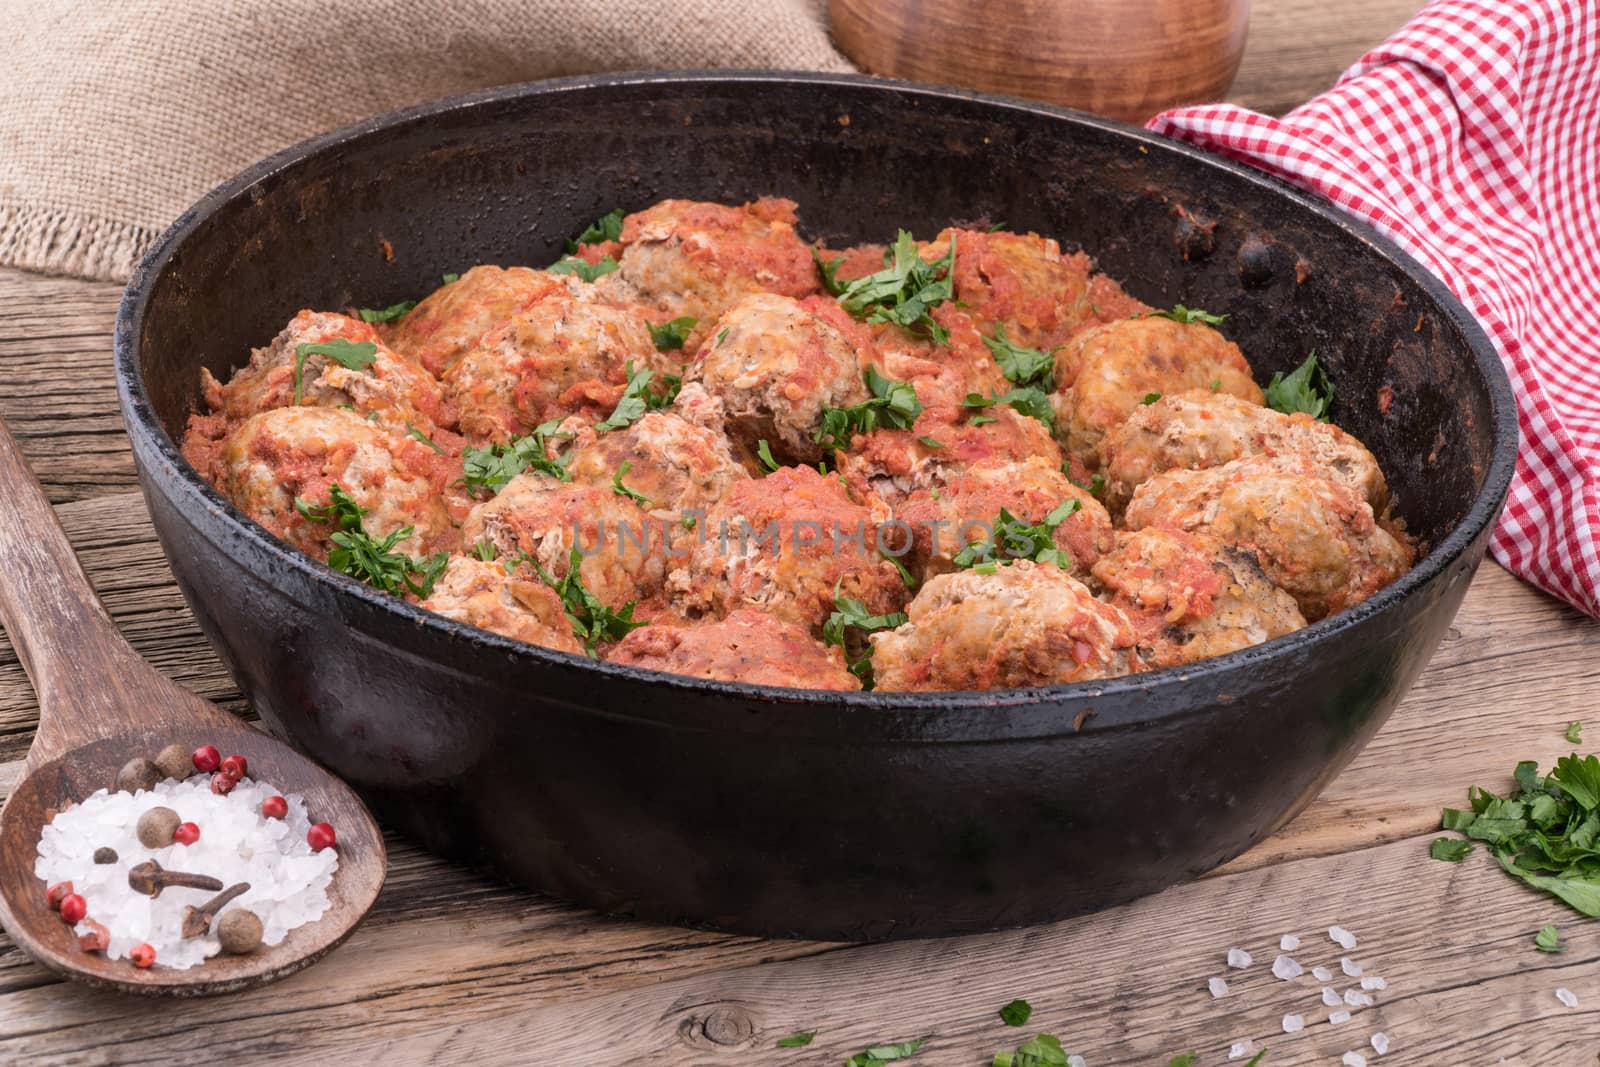 meat balls with herbs in pan on wooden rustic background. Selective focus.